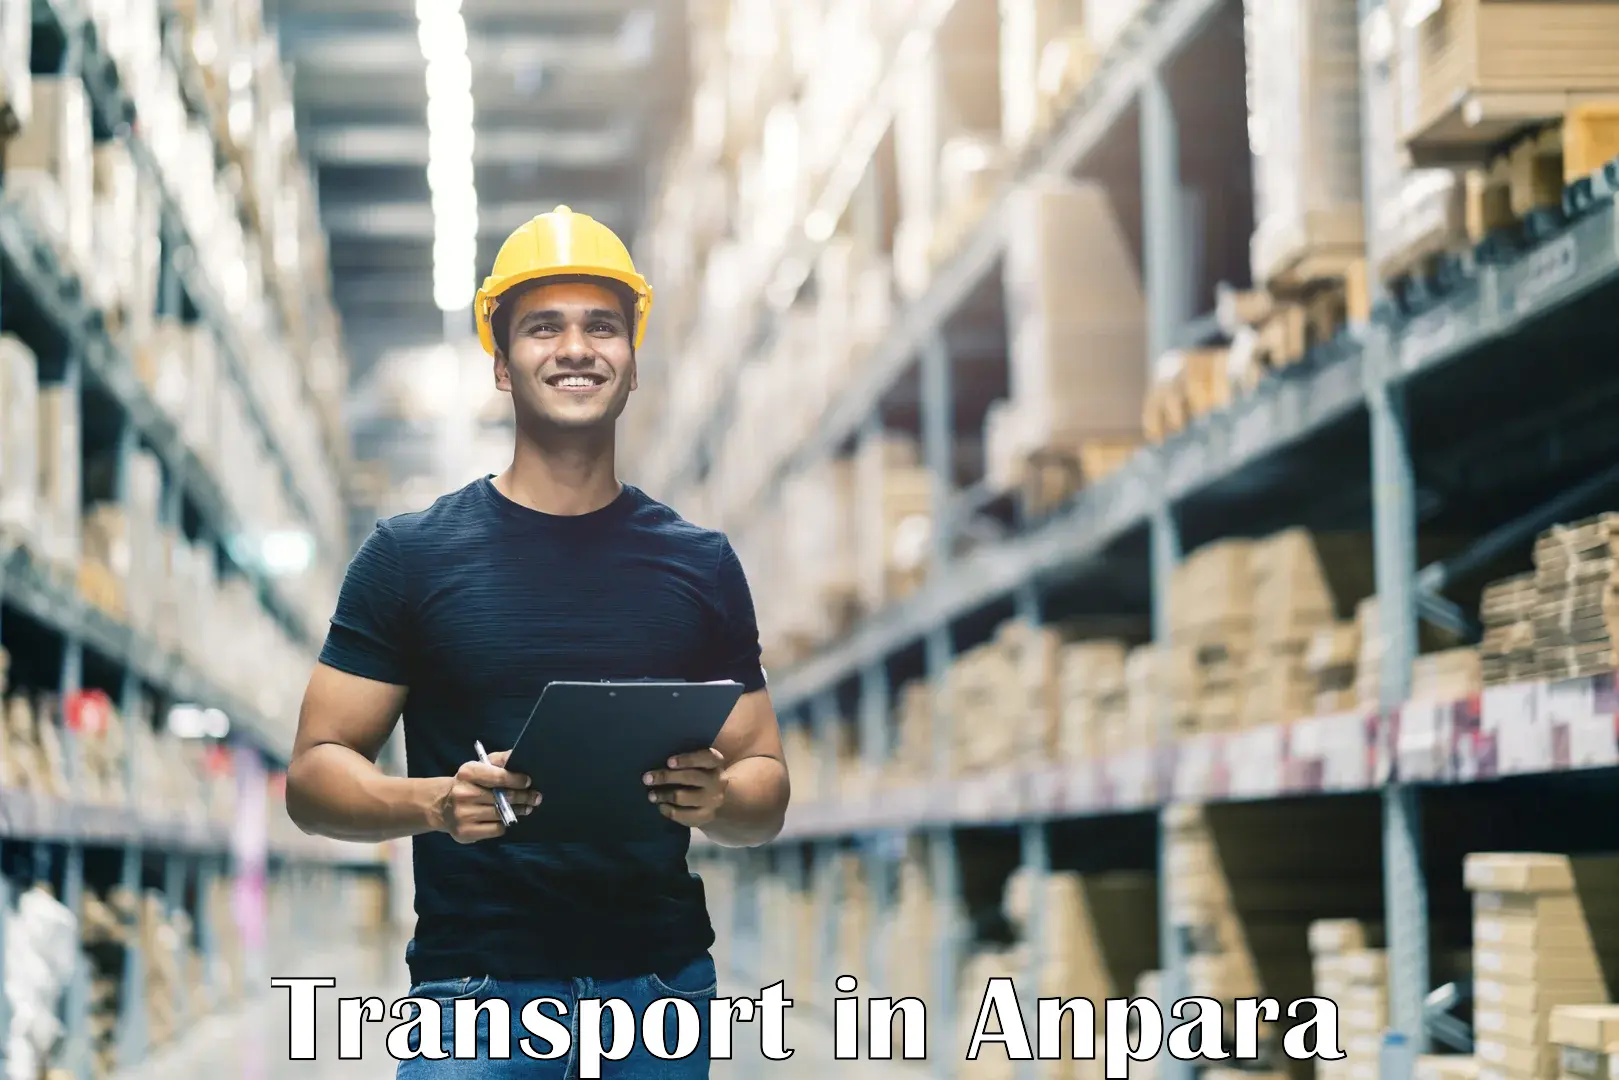 Shipping services in Anpara